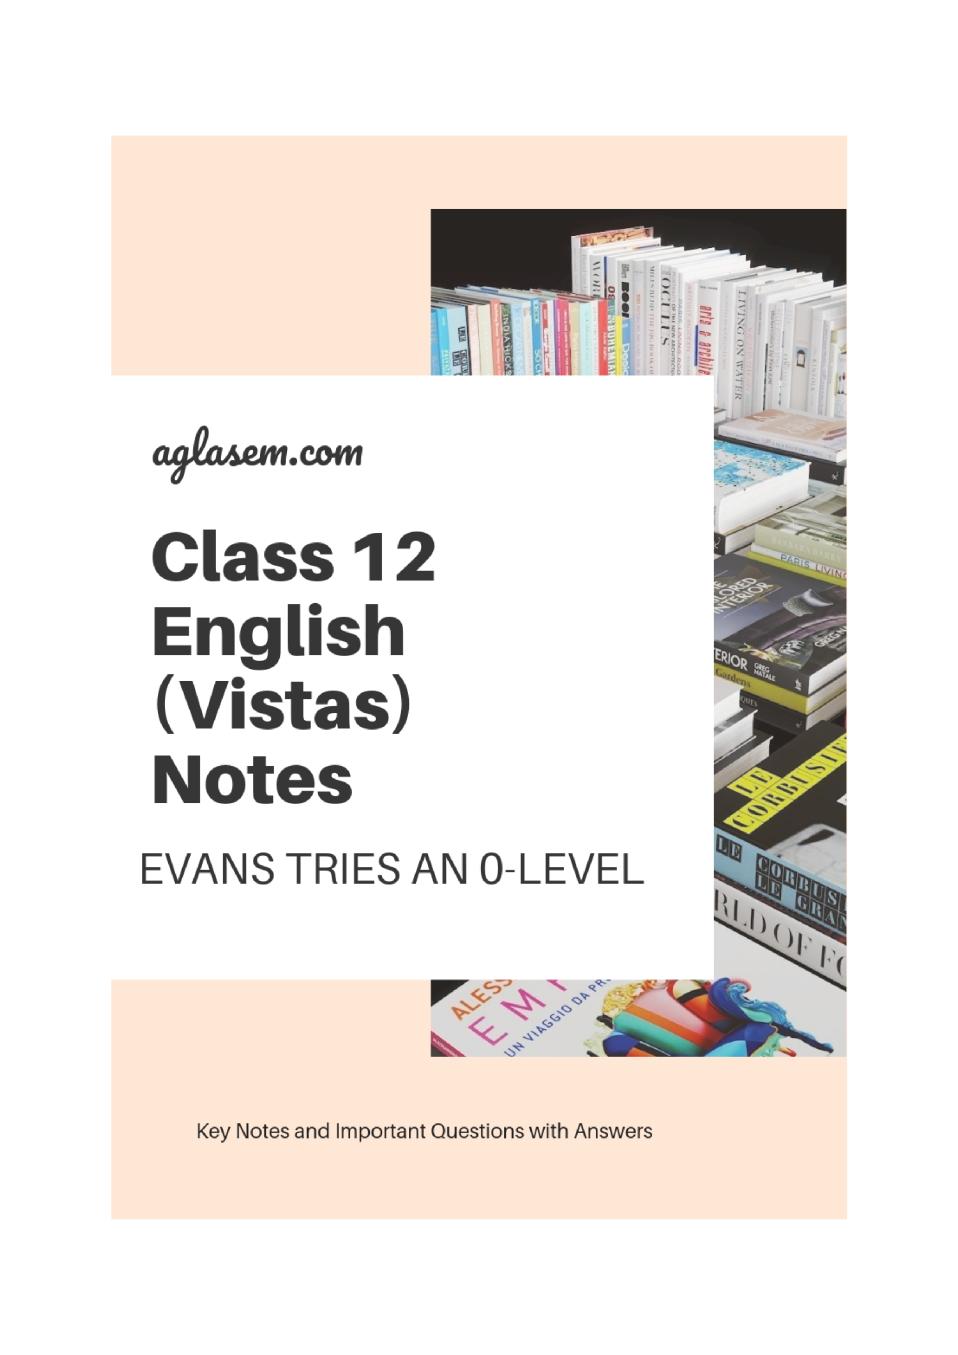 Class 12 English Vistas Notes For Evans Tries an O-Level - Page 1